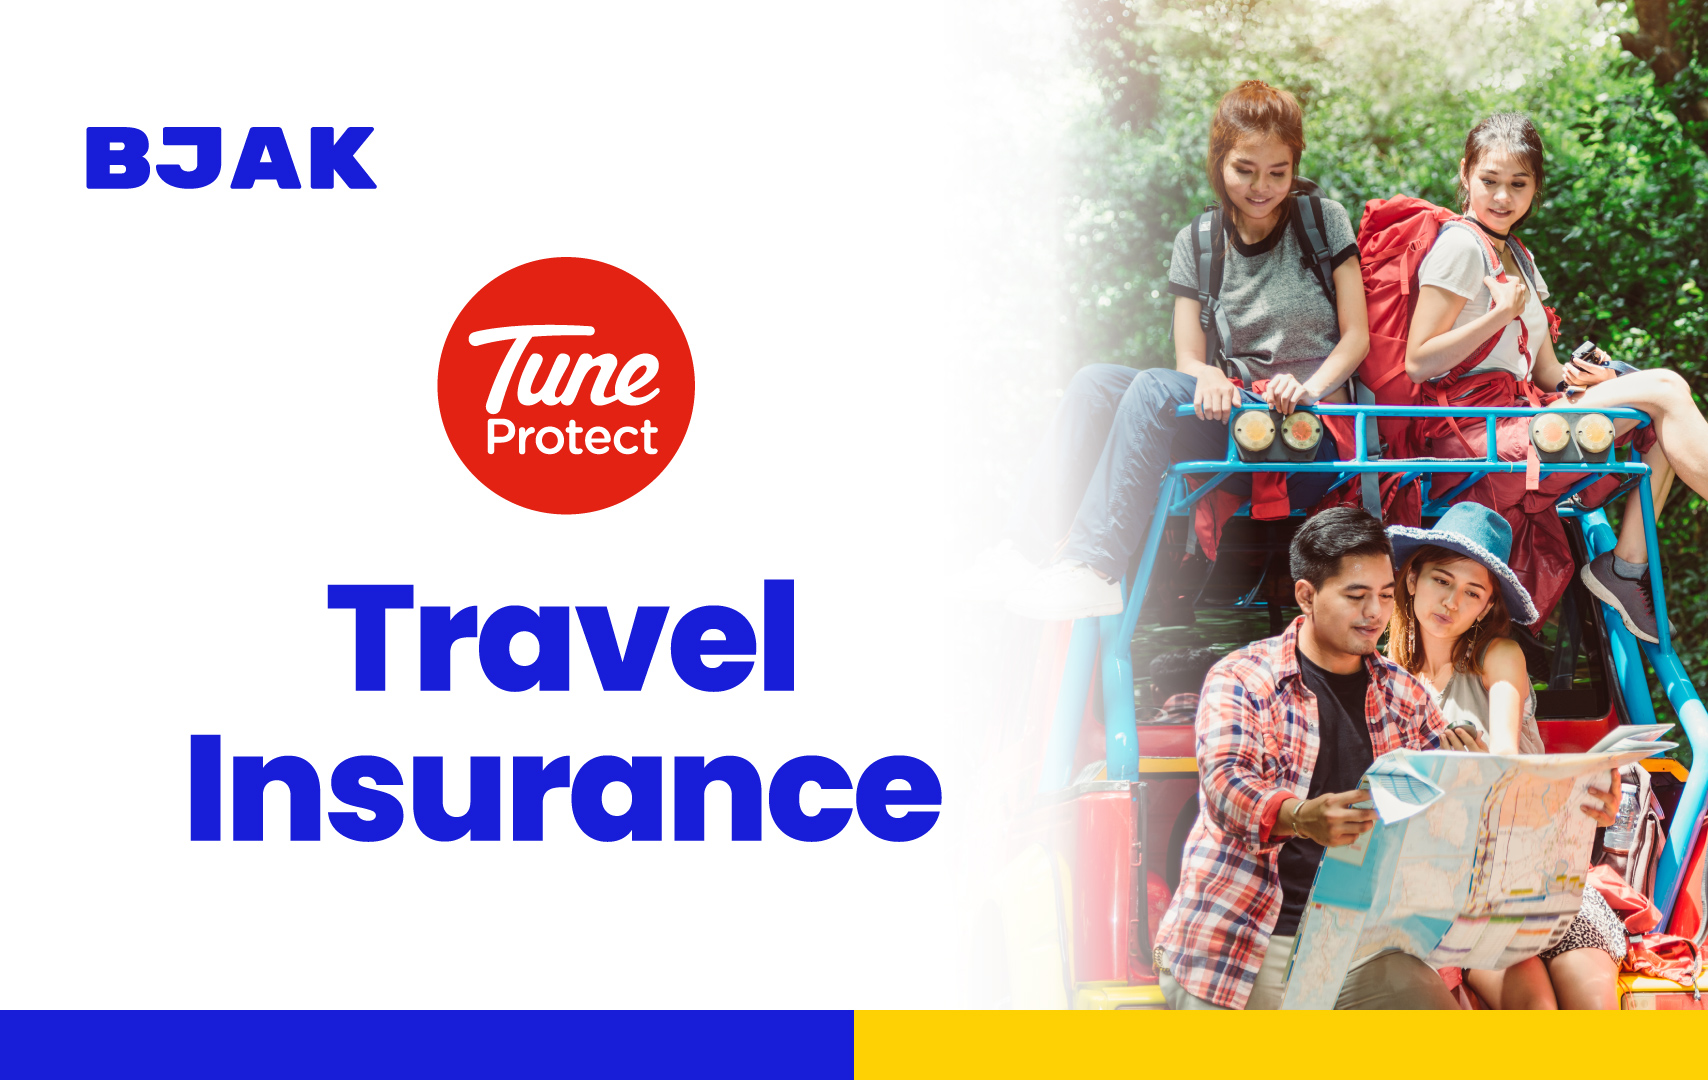 tune travel insurance review